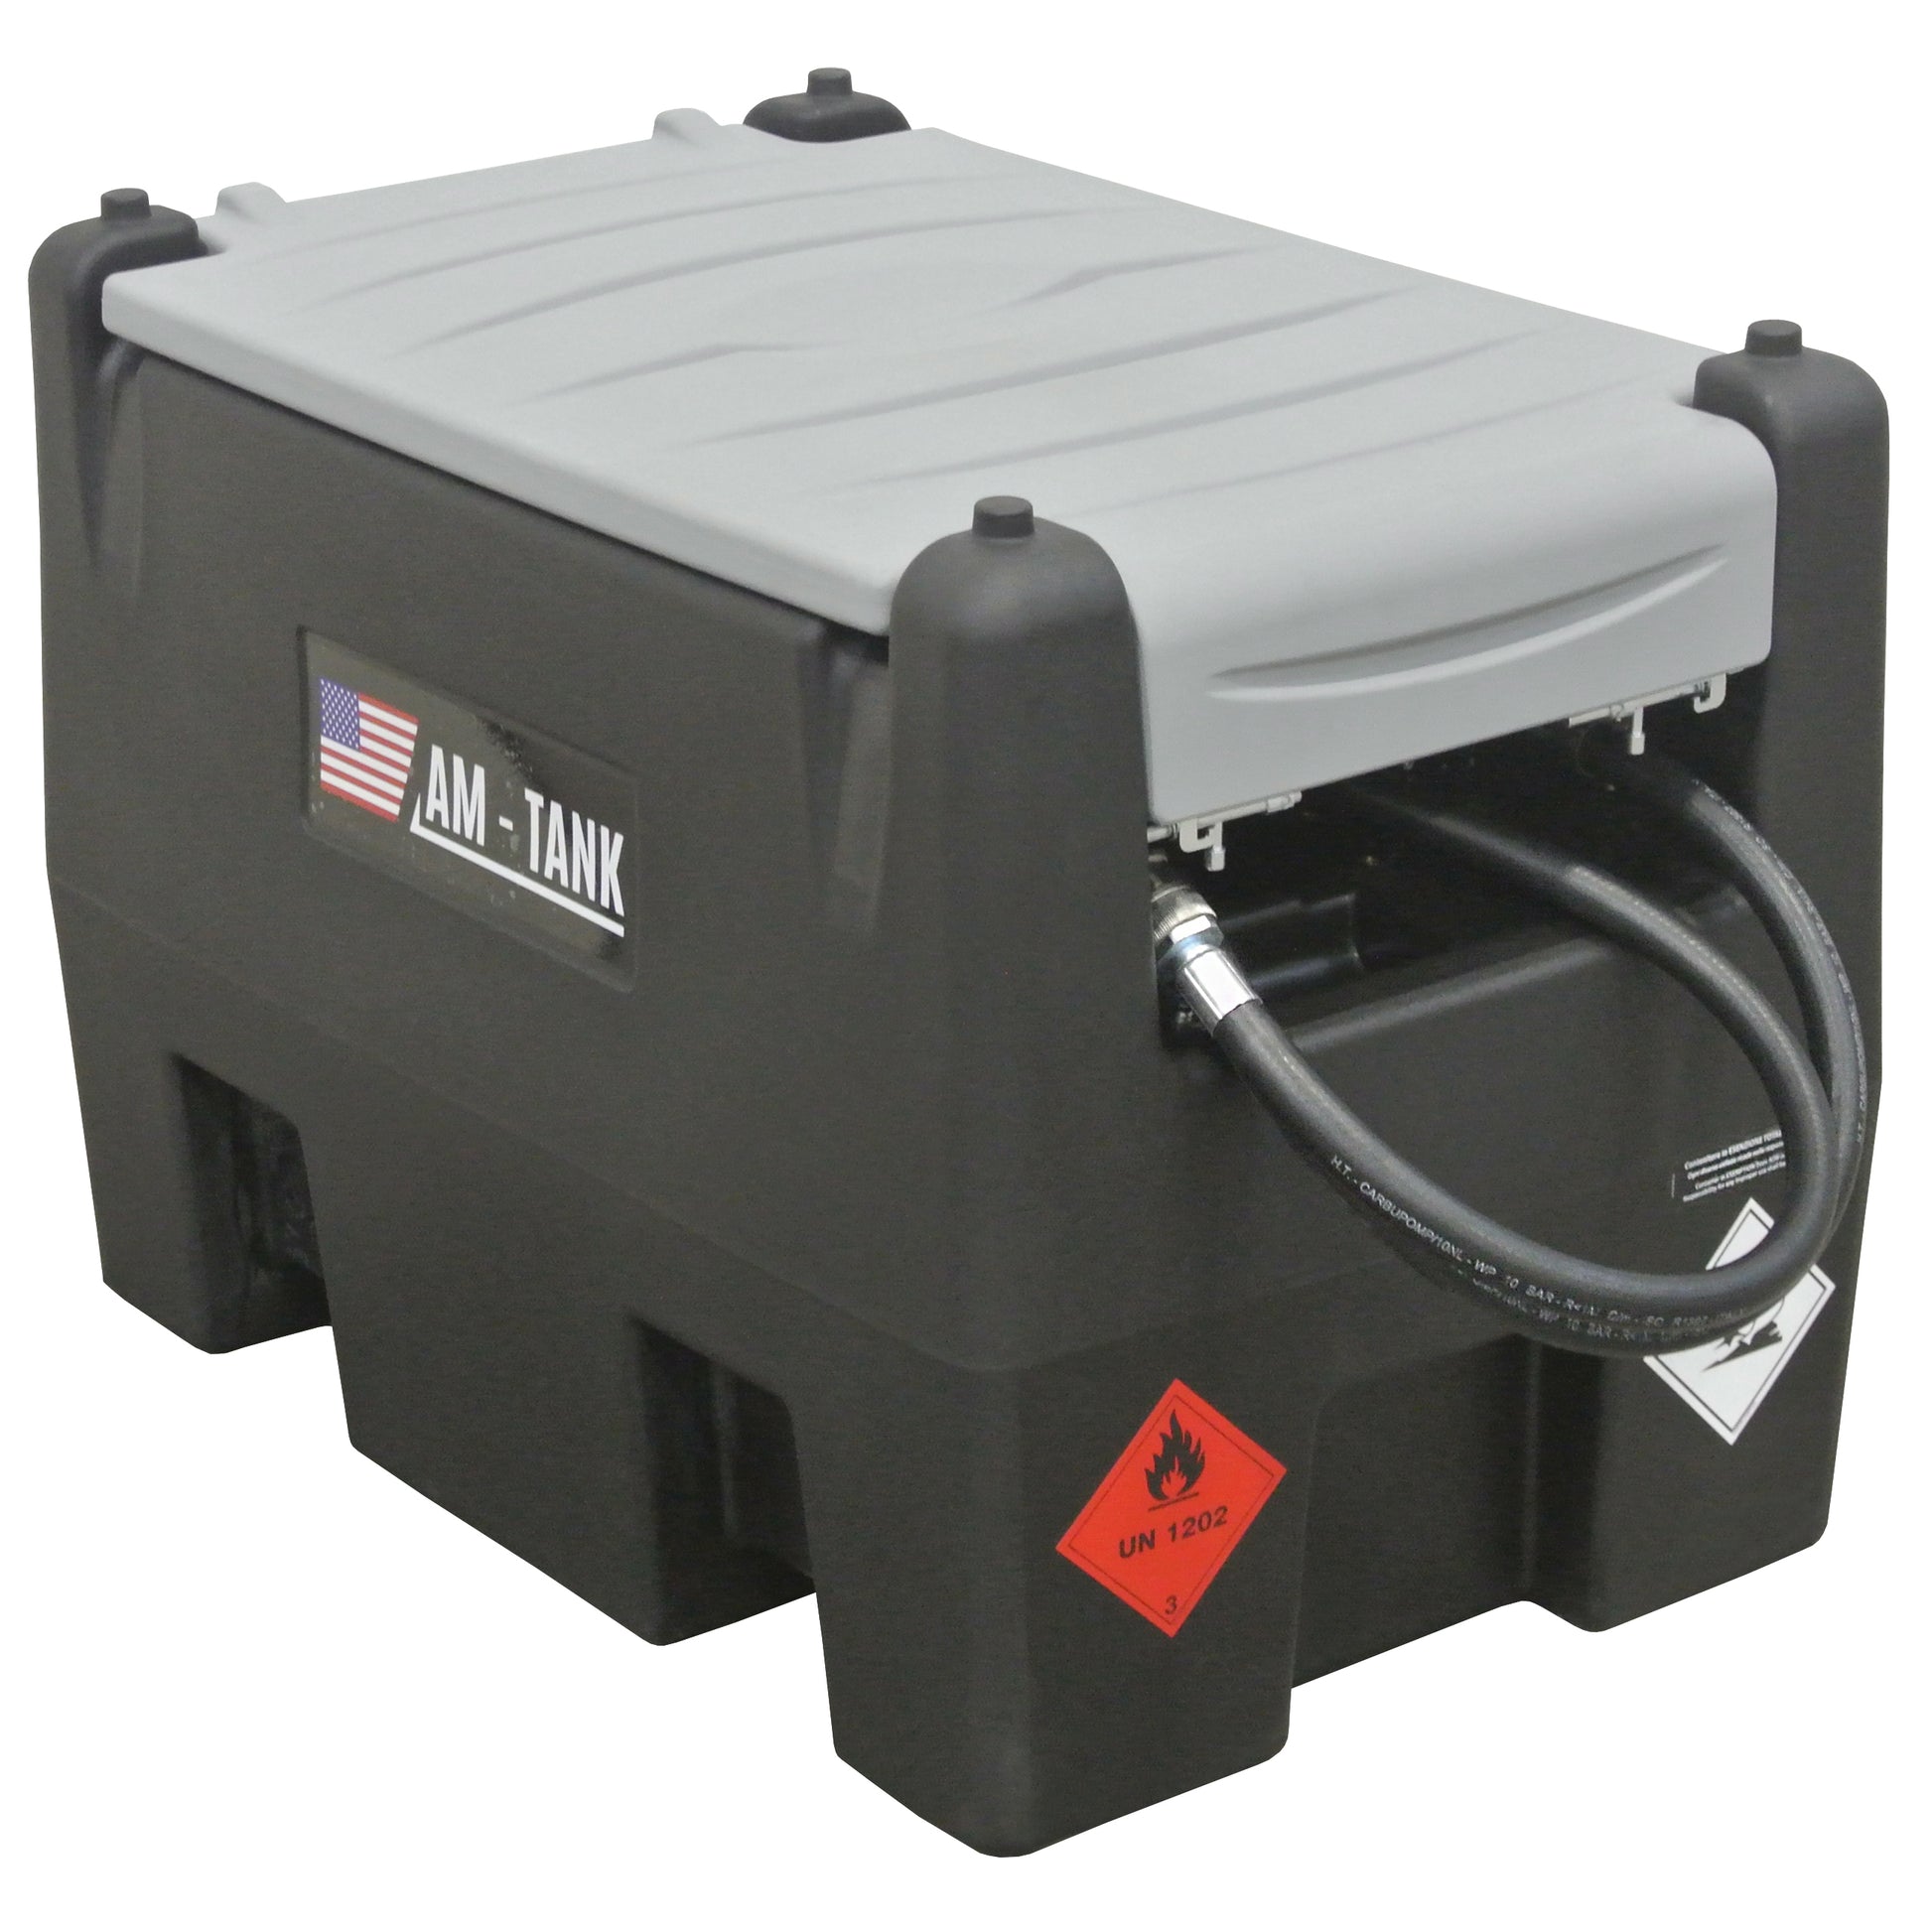 25 Gallon Plastic Portable Diesel Fuel Tank with Pump and Fuel Nozzle